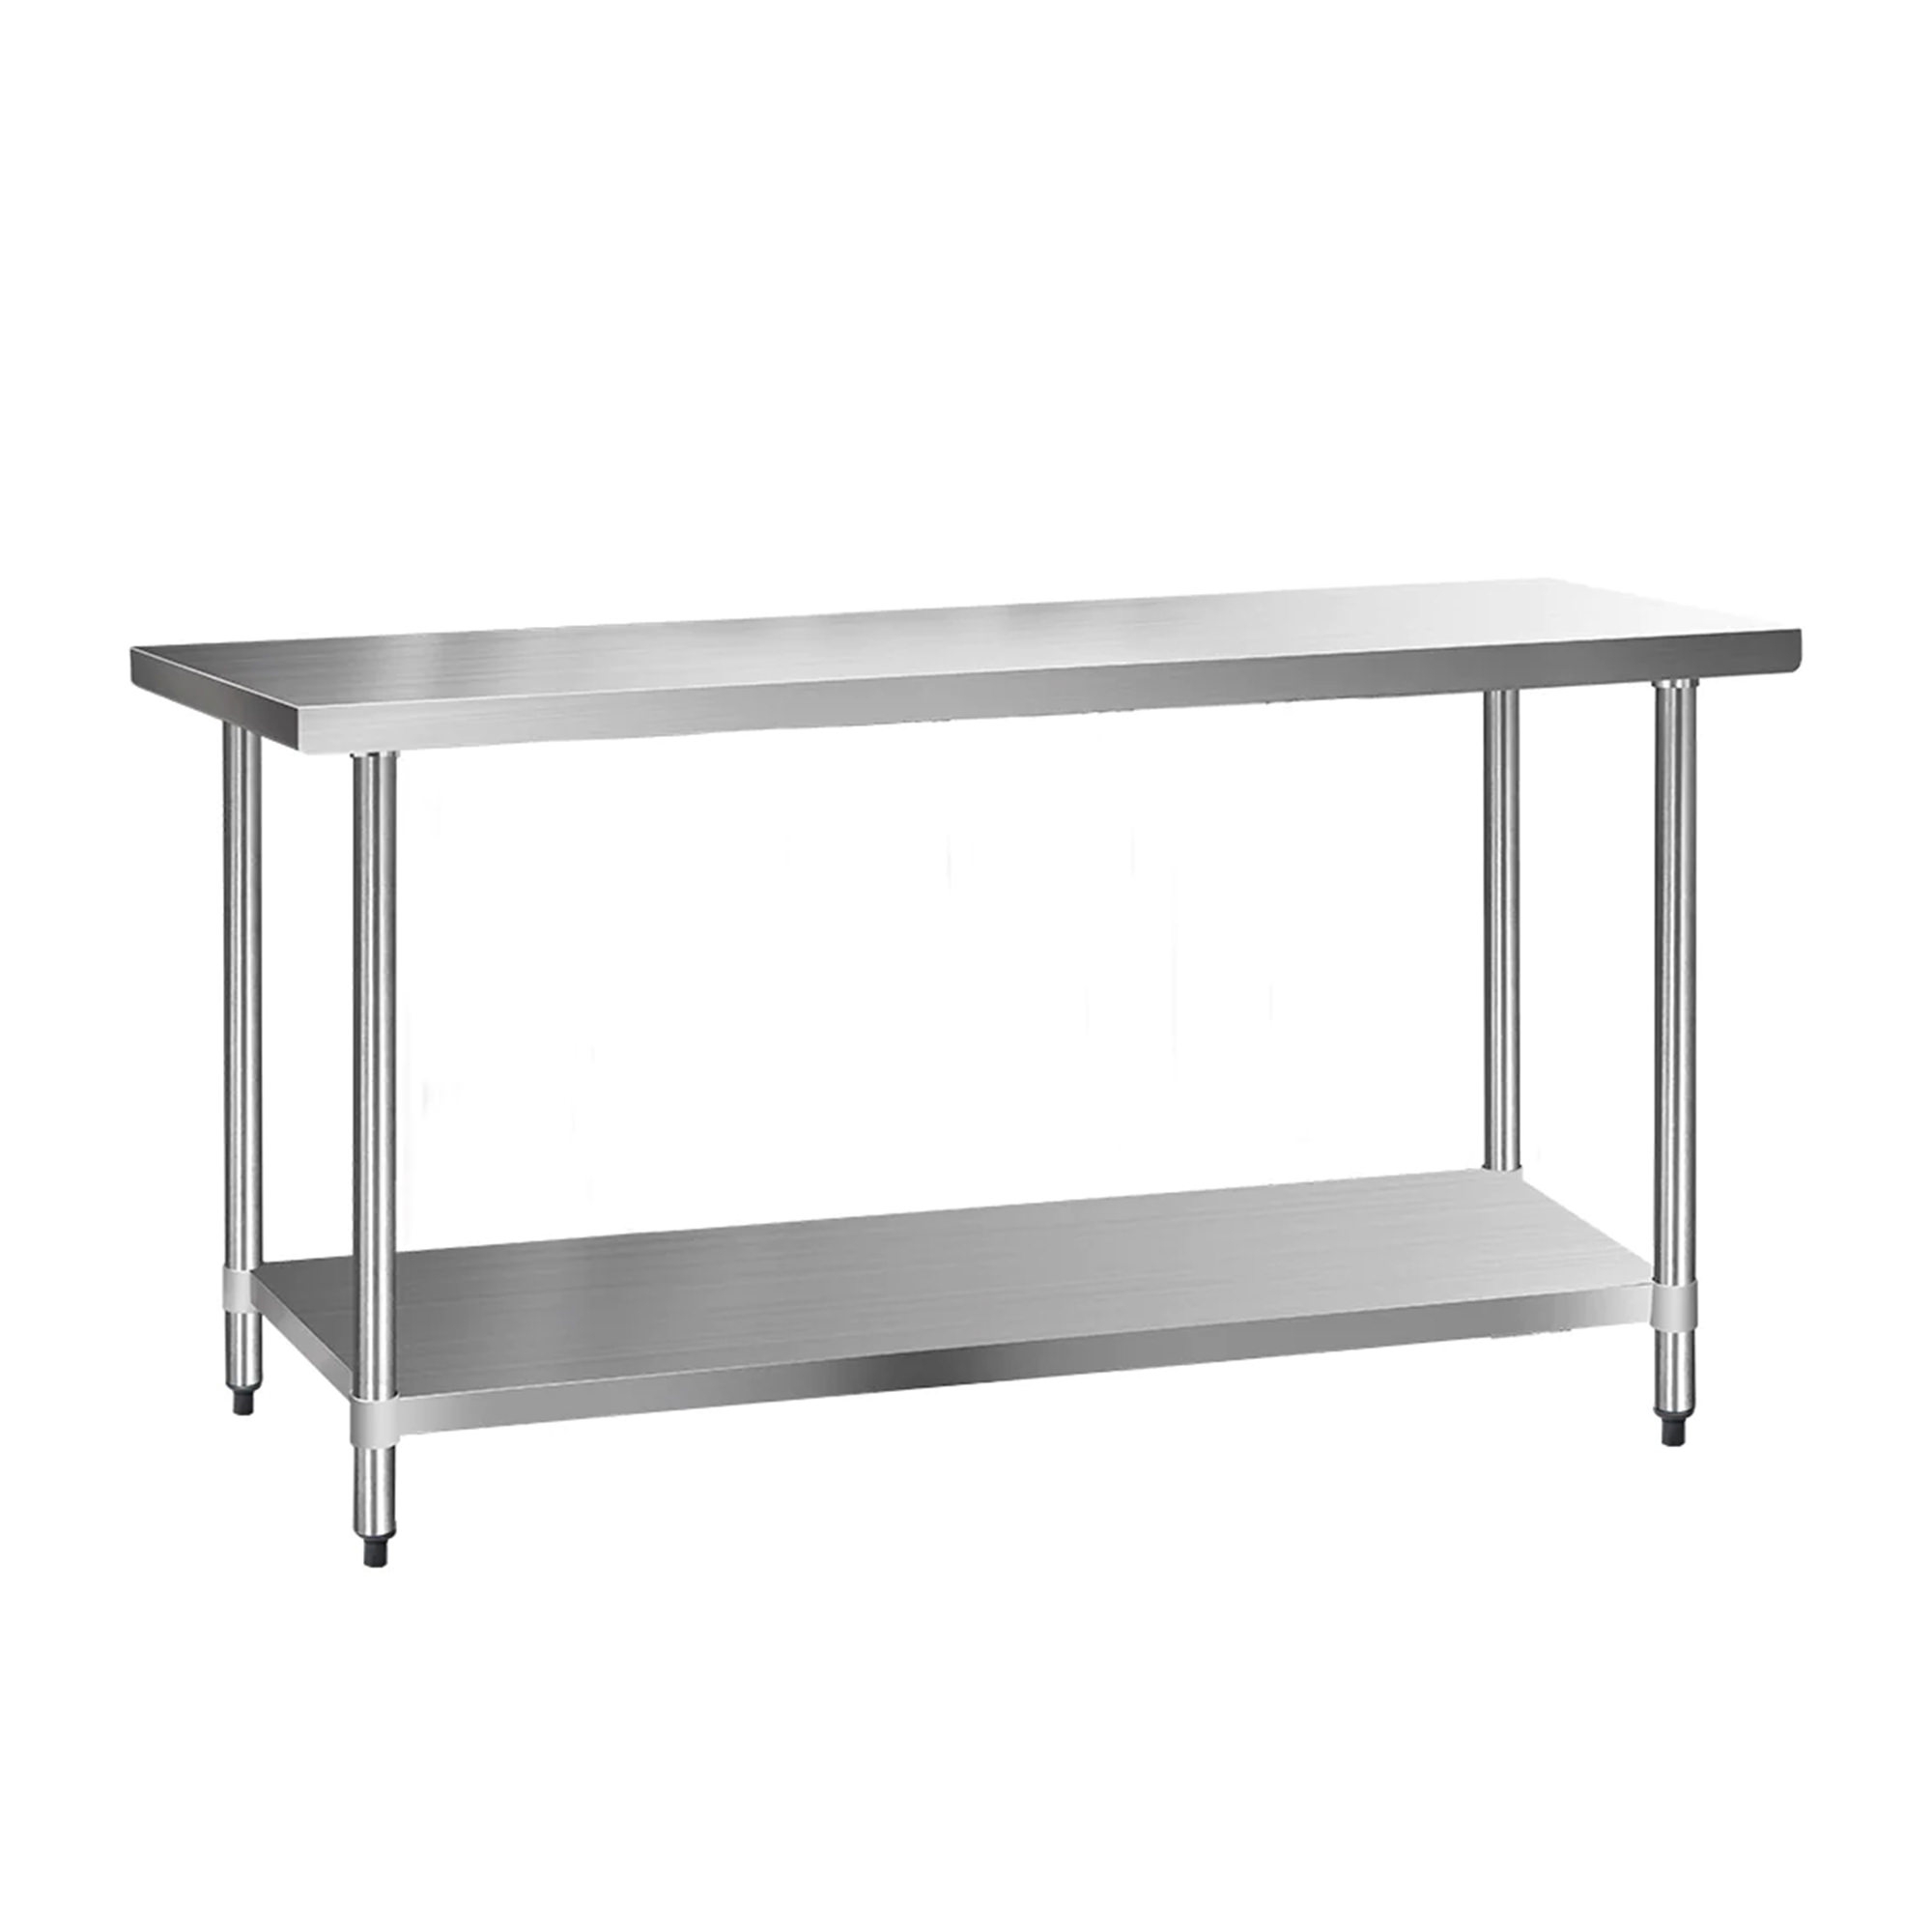 Cefito 304 Stainless Steel Kitchen Bench 182.9x61cm Image 1